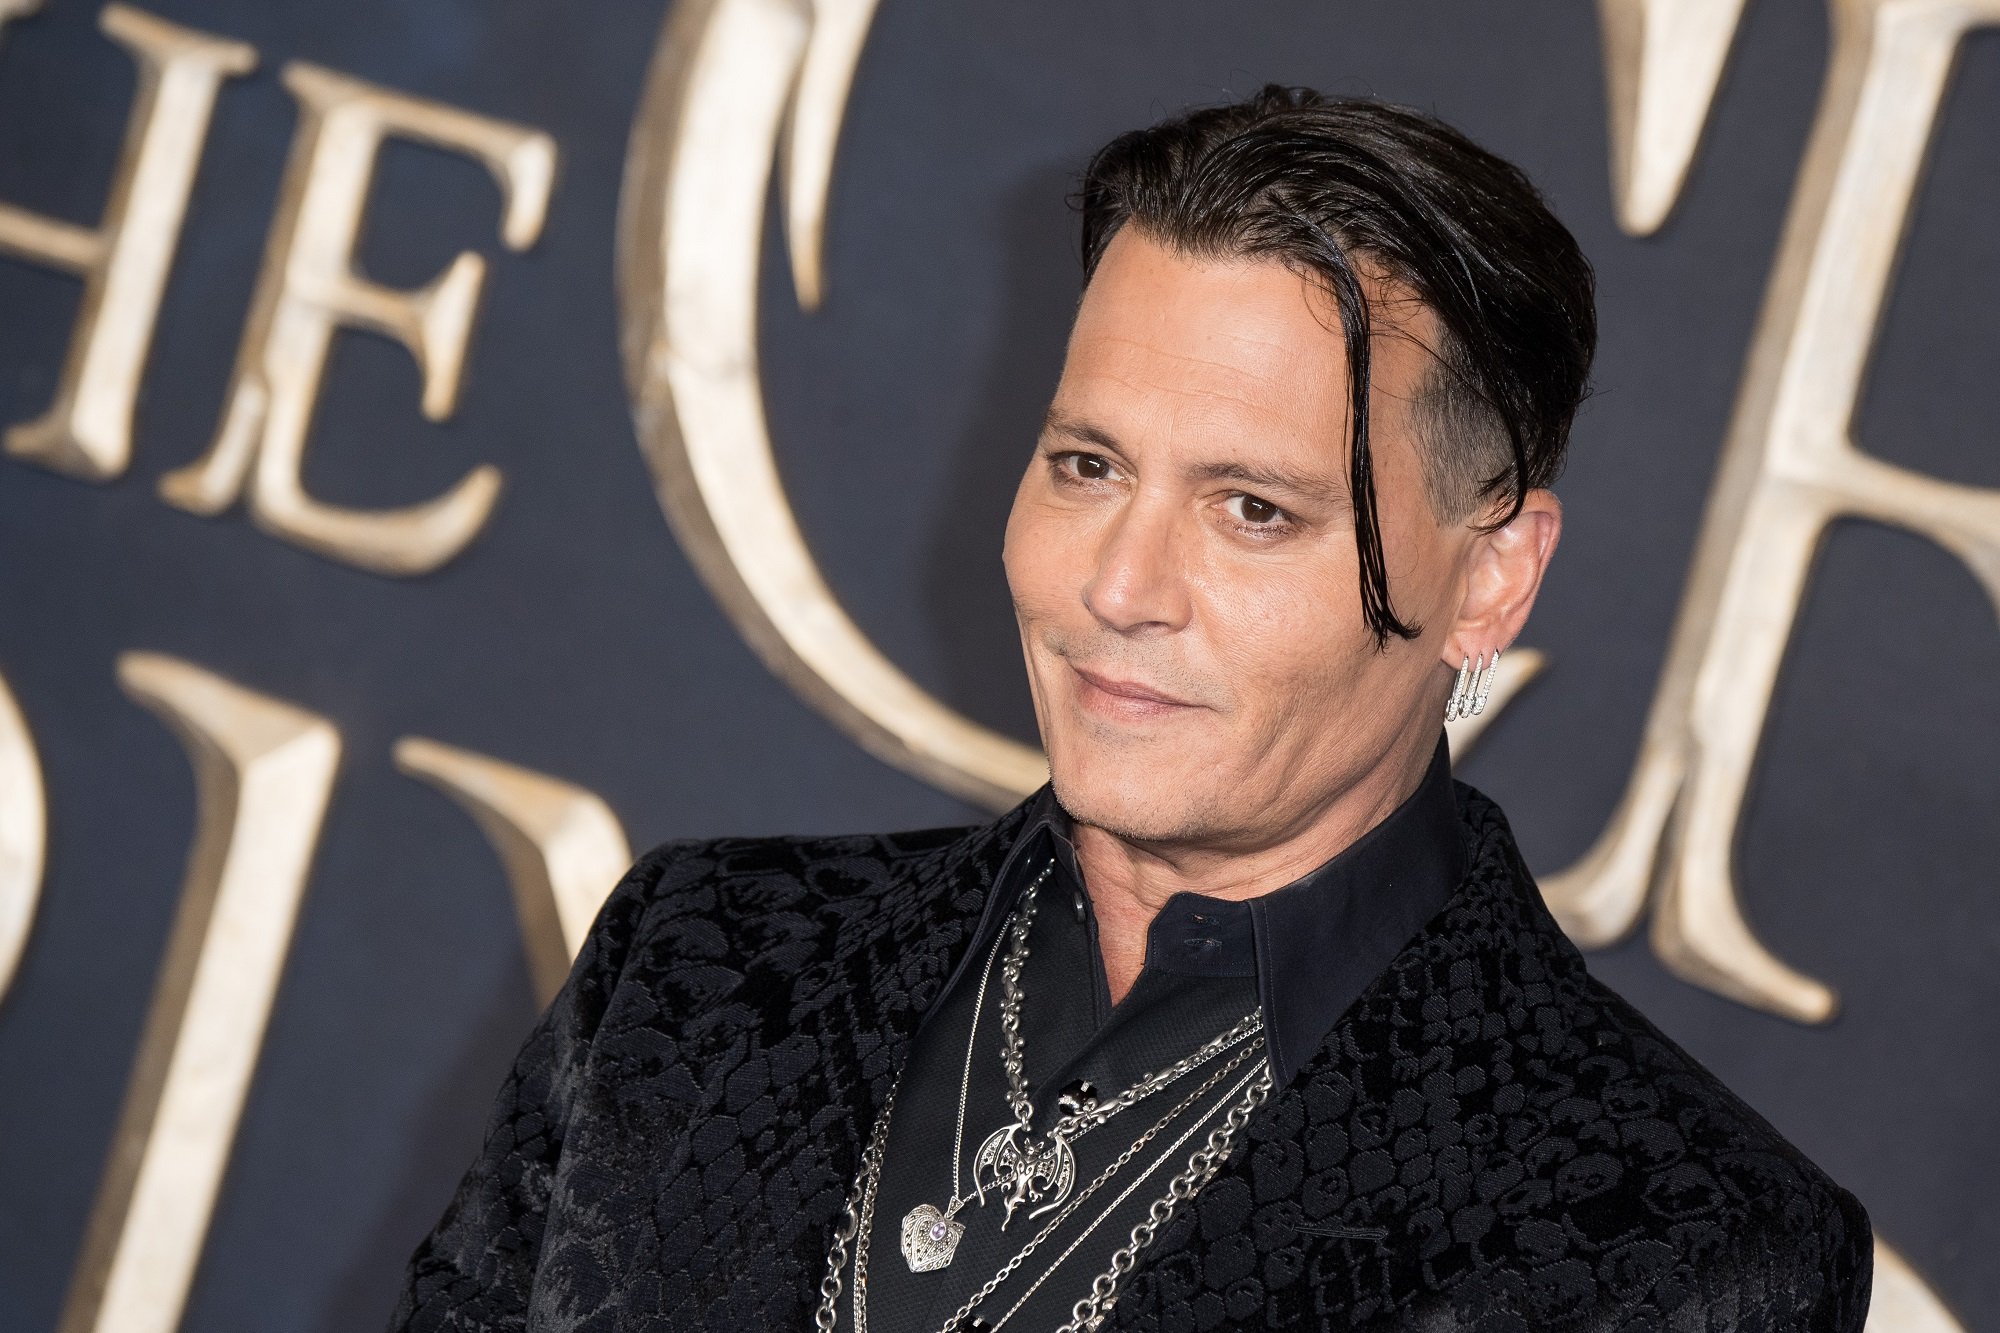 Johnny Depp ‘Was Asked to Resign’ From ‘Fantastic Beasts’ Franchise: ‘My Resolve Remains Strong’